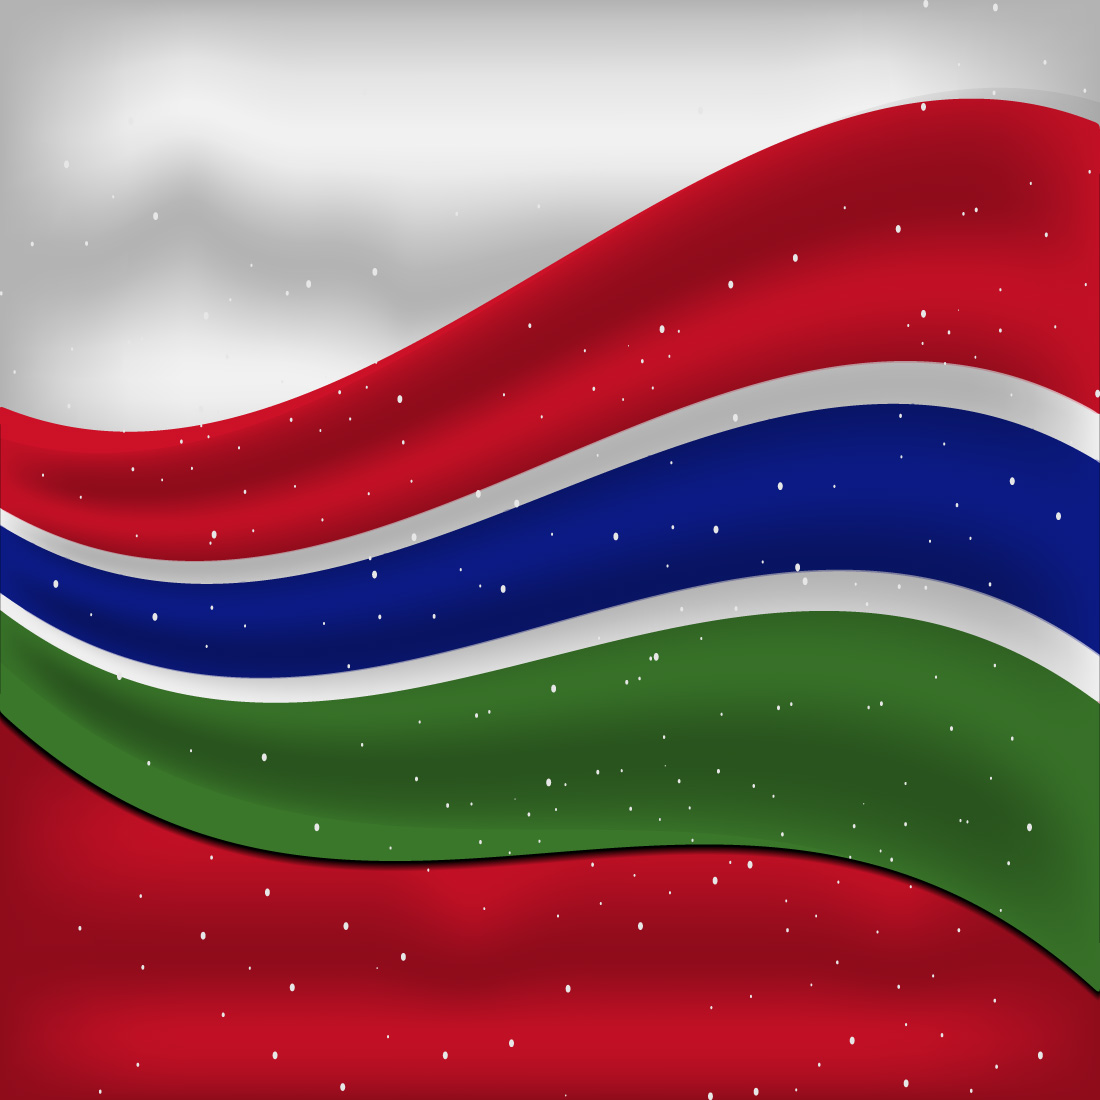 Magnificent image of the Gambia flag.